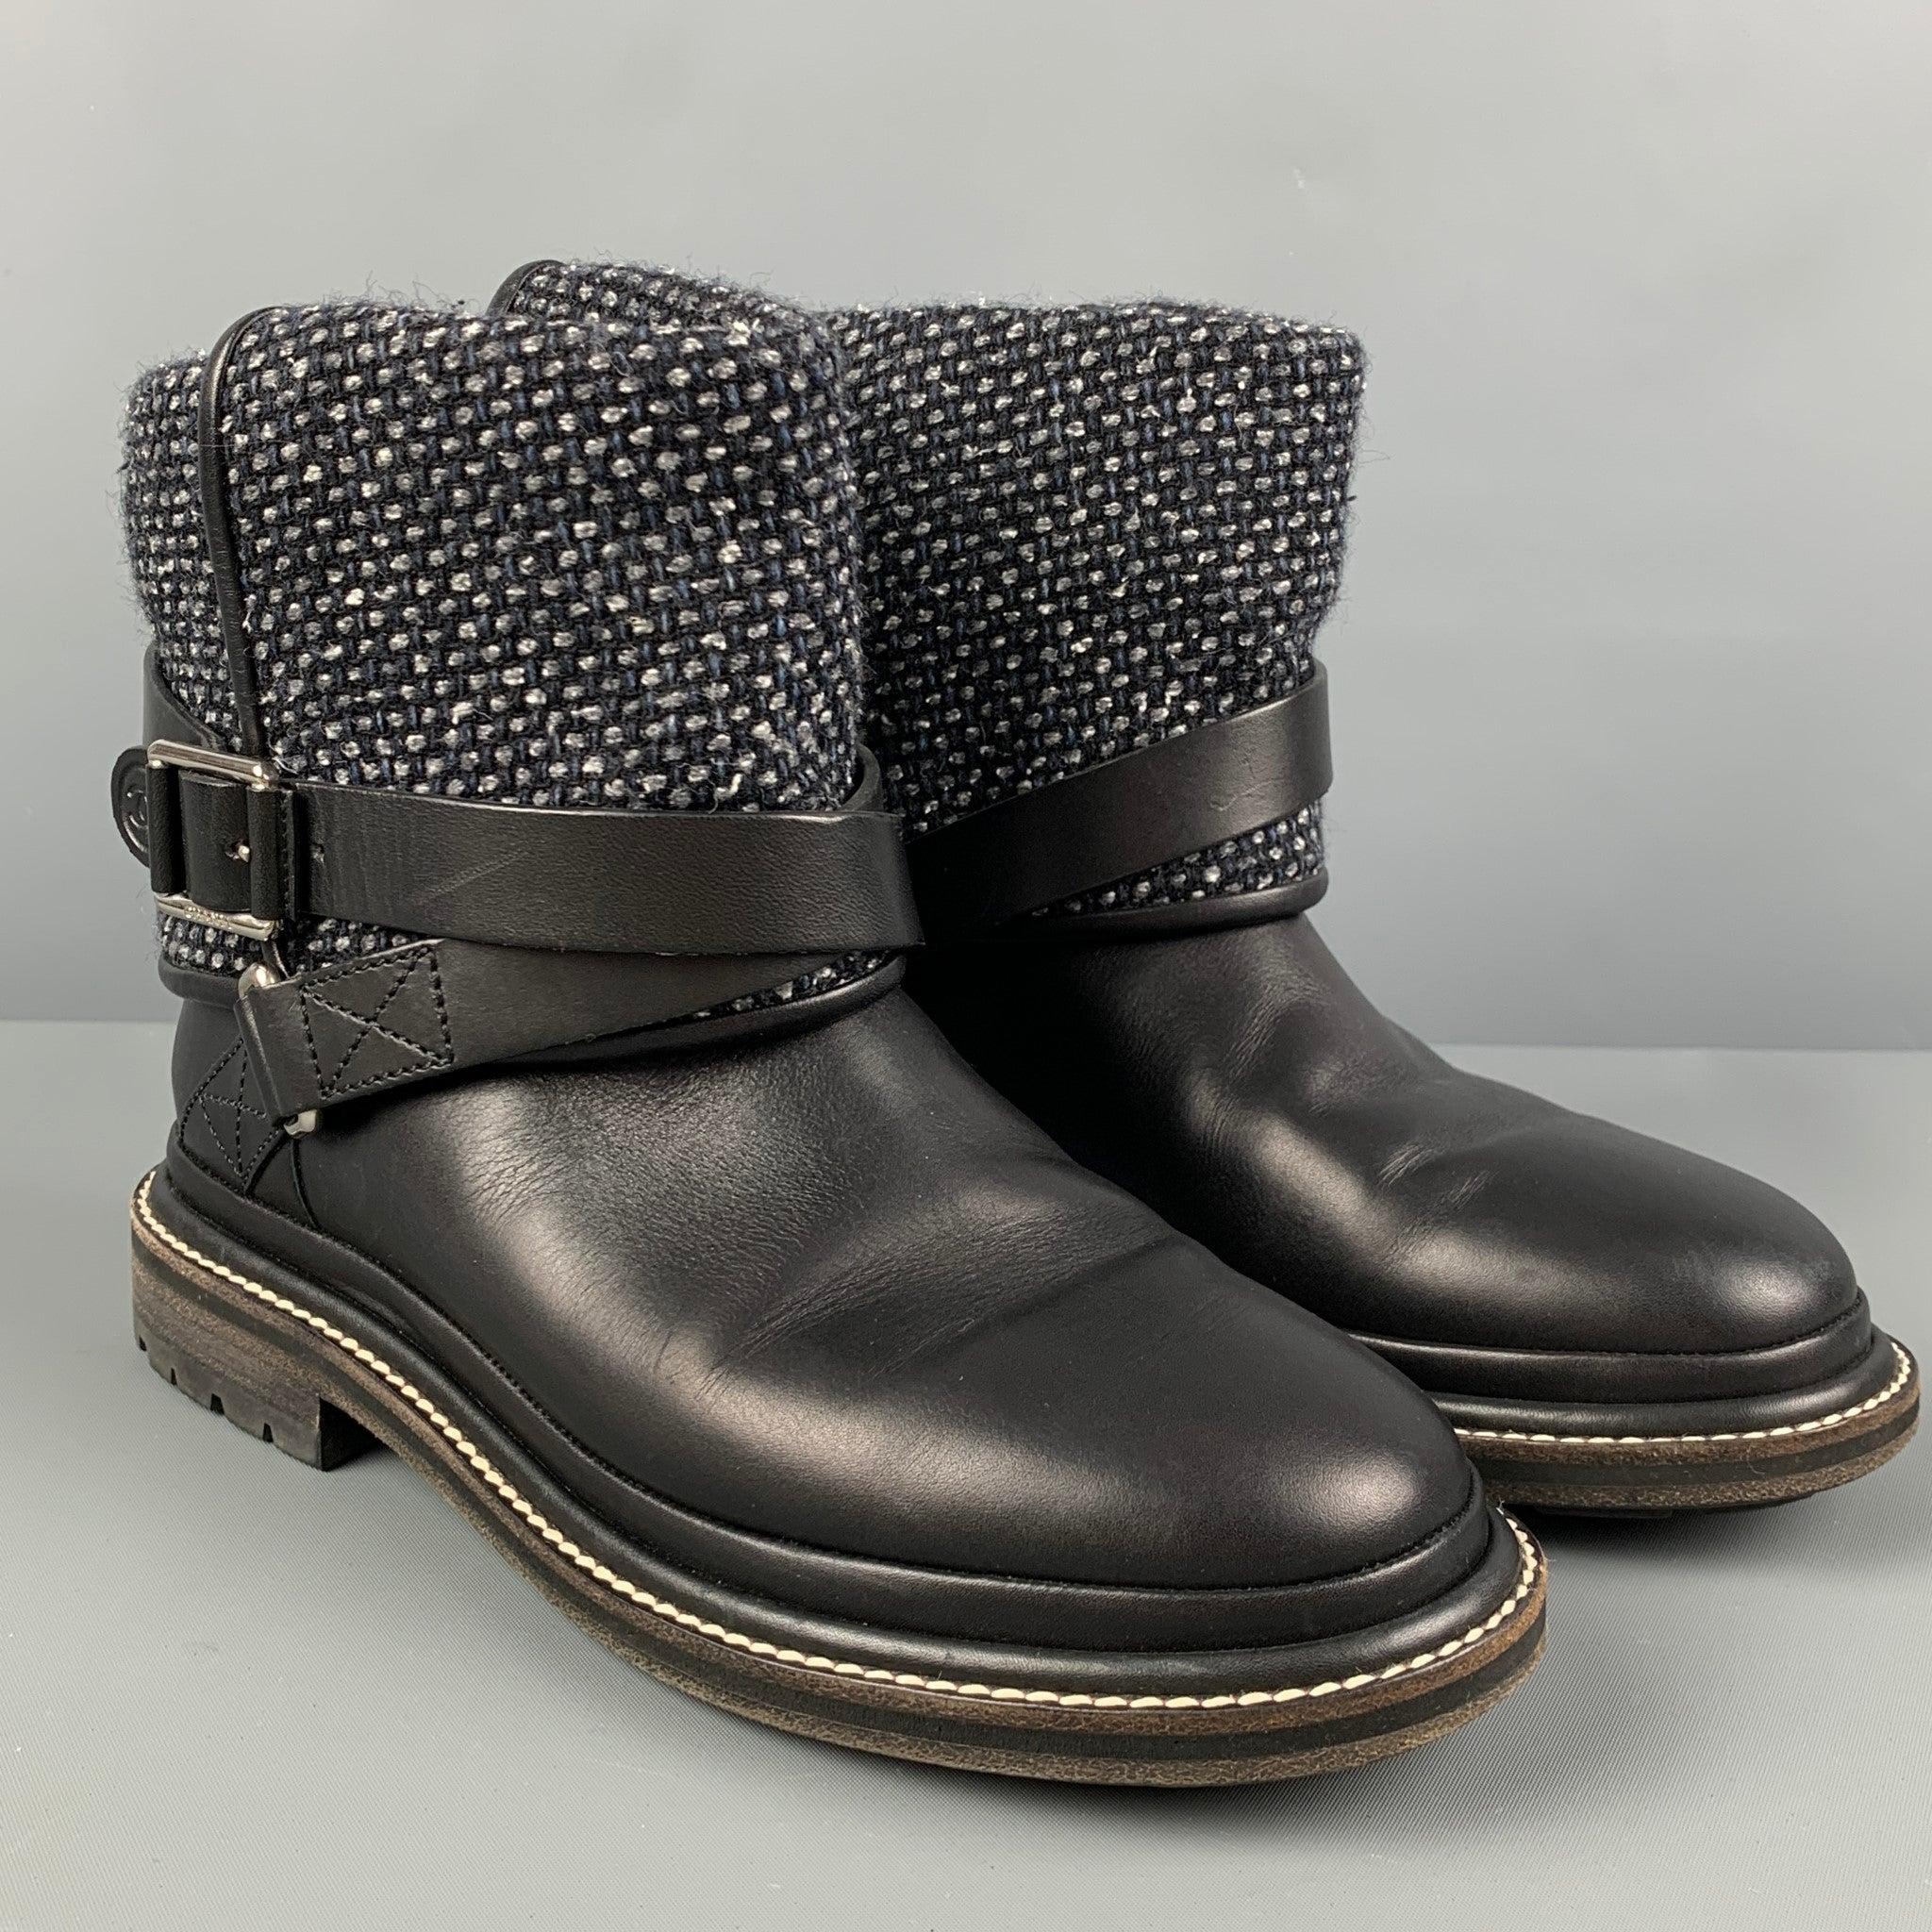 CHANEL boots comes in a black & grey mixed materials featuring a pull on style, contrast stitching, logo details, and a buckle strap closure.
Very Good
Pre-Owned Condition. 

Marked:   37.5 

Measurements: 
  Length: 10.75 inches  Width: 3.75 inches